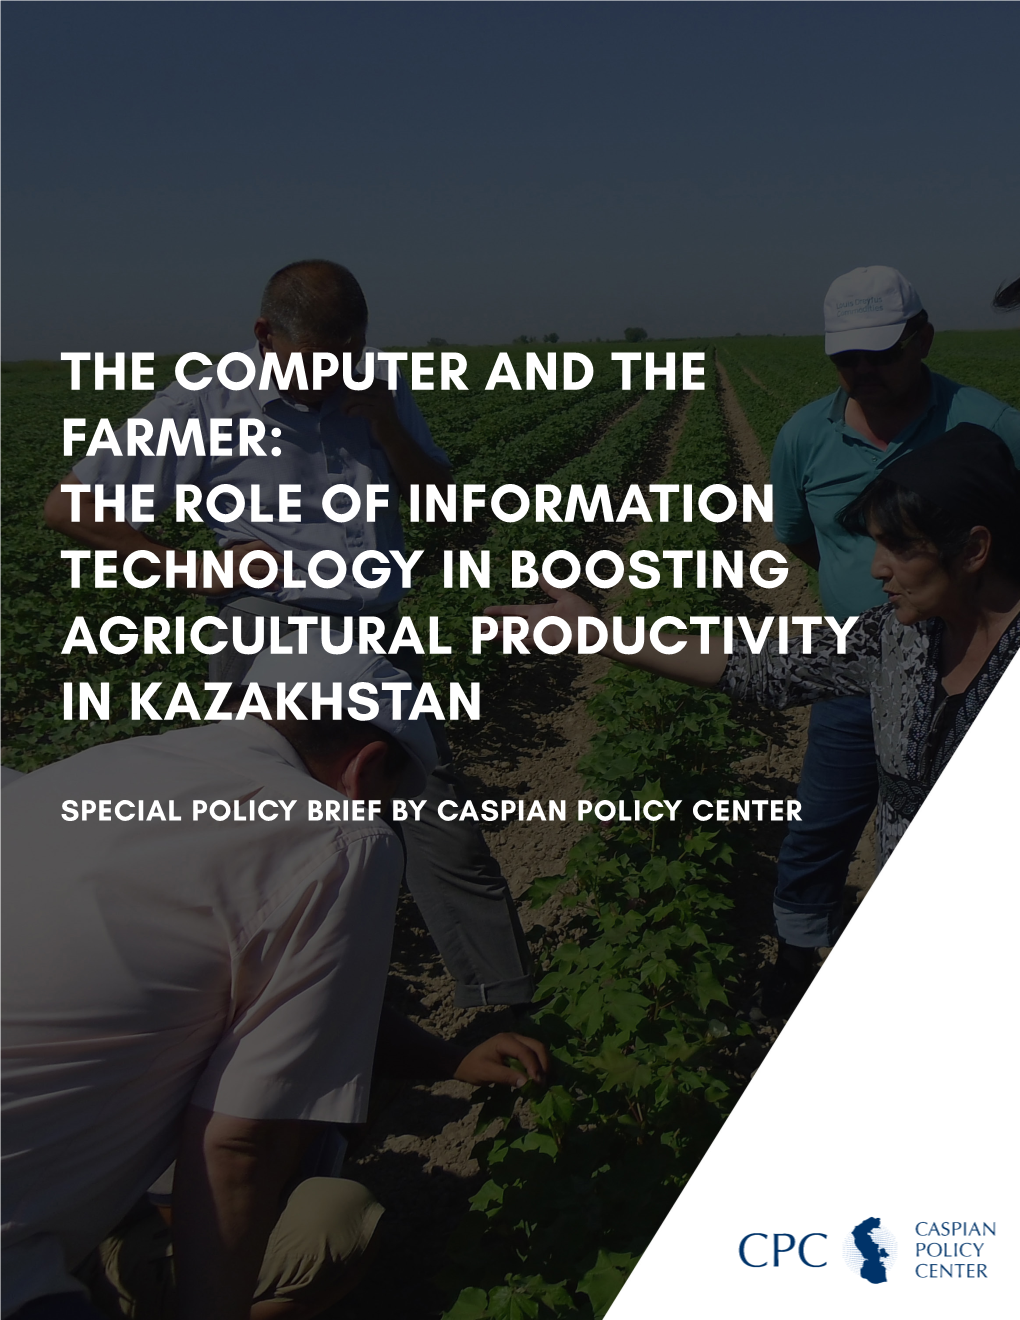 The Computer and the Farmer: the Role of Information Technology in Boosting Agricultural Productivity in Kazakhstan